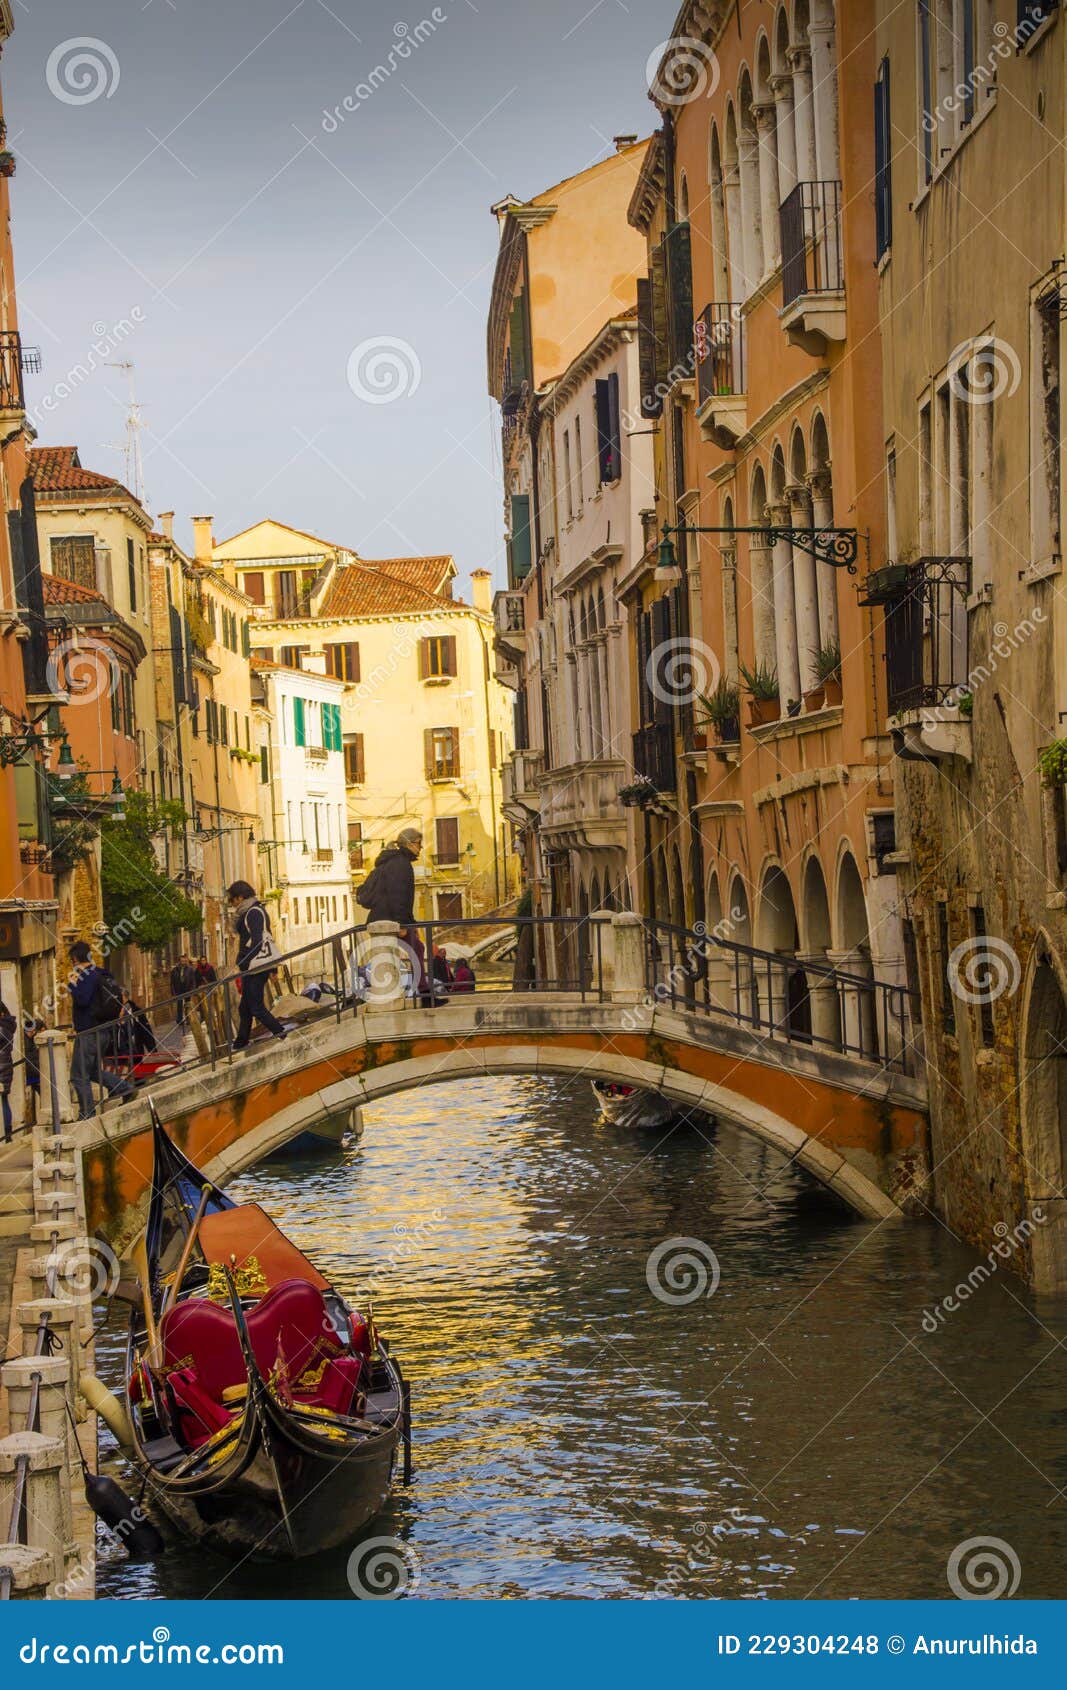 Daily Activities in Canal Street N Vanice, Italy Stock Photo - Image of ...